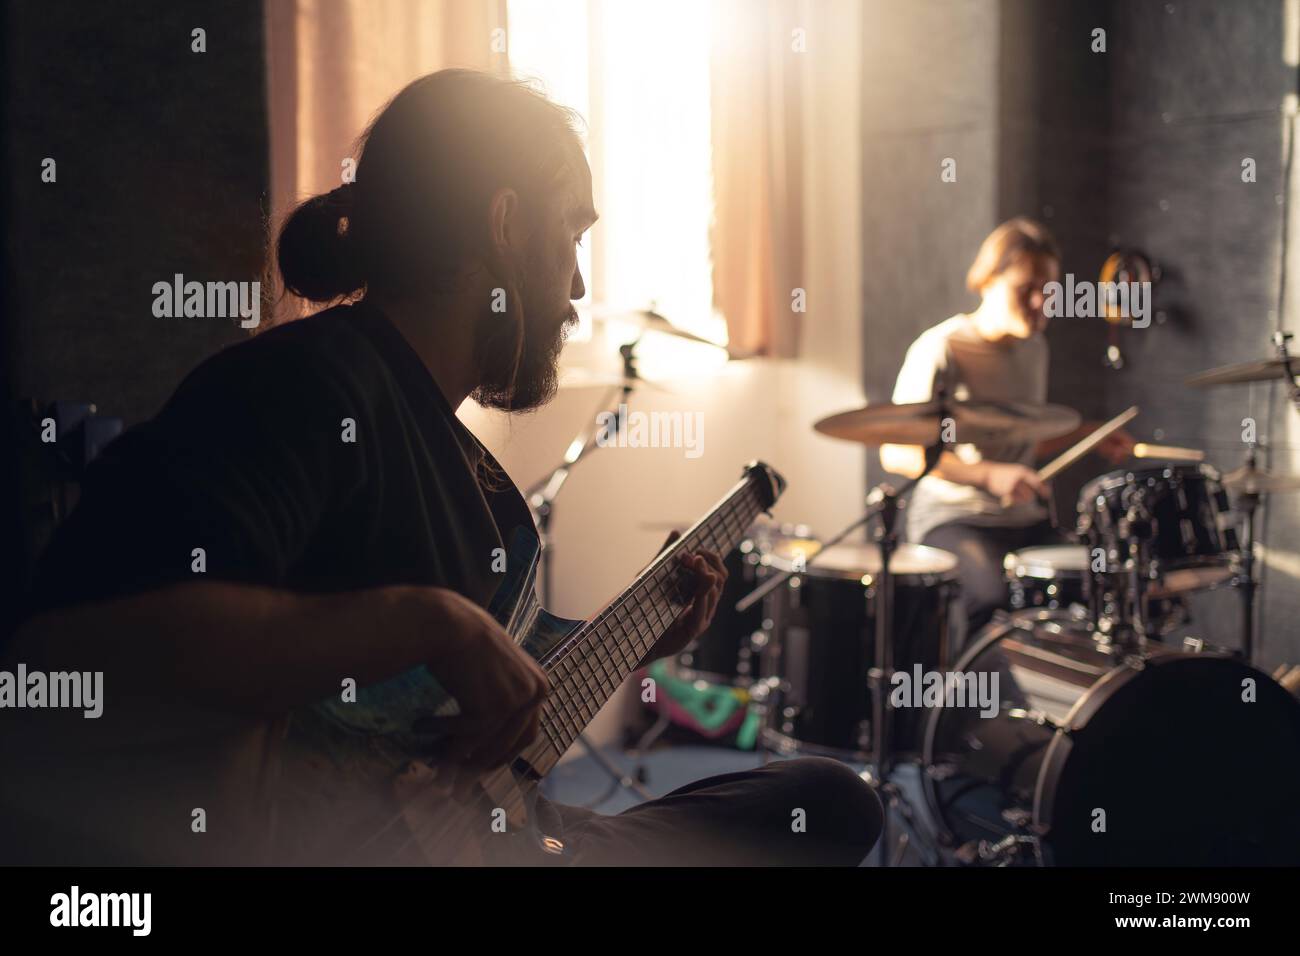 Band members practicing in a music studio with focus on guitarist. Stock Photo